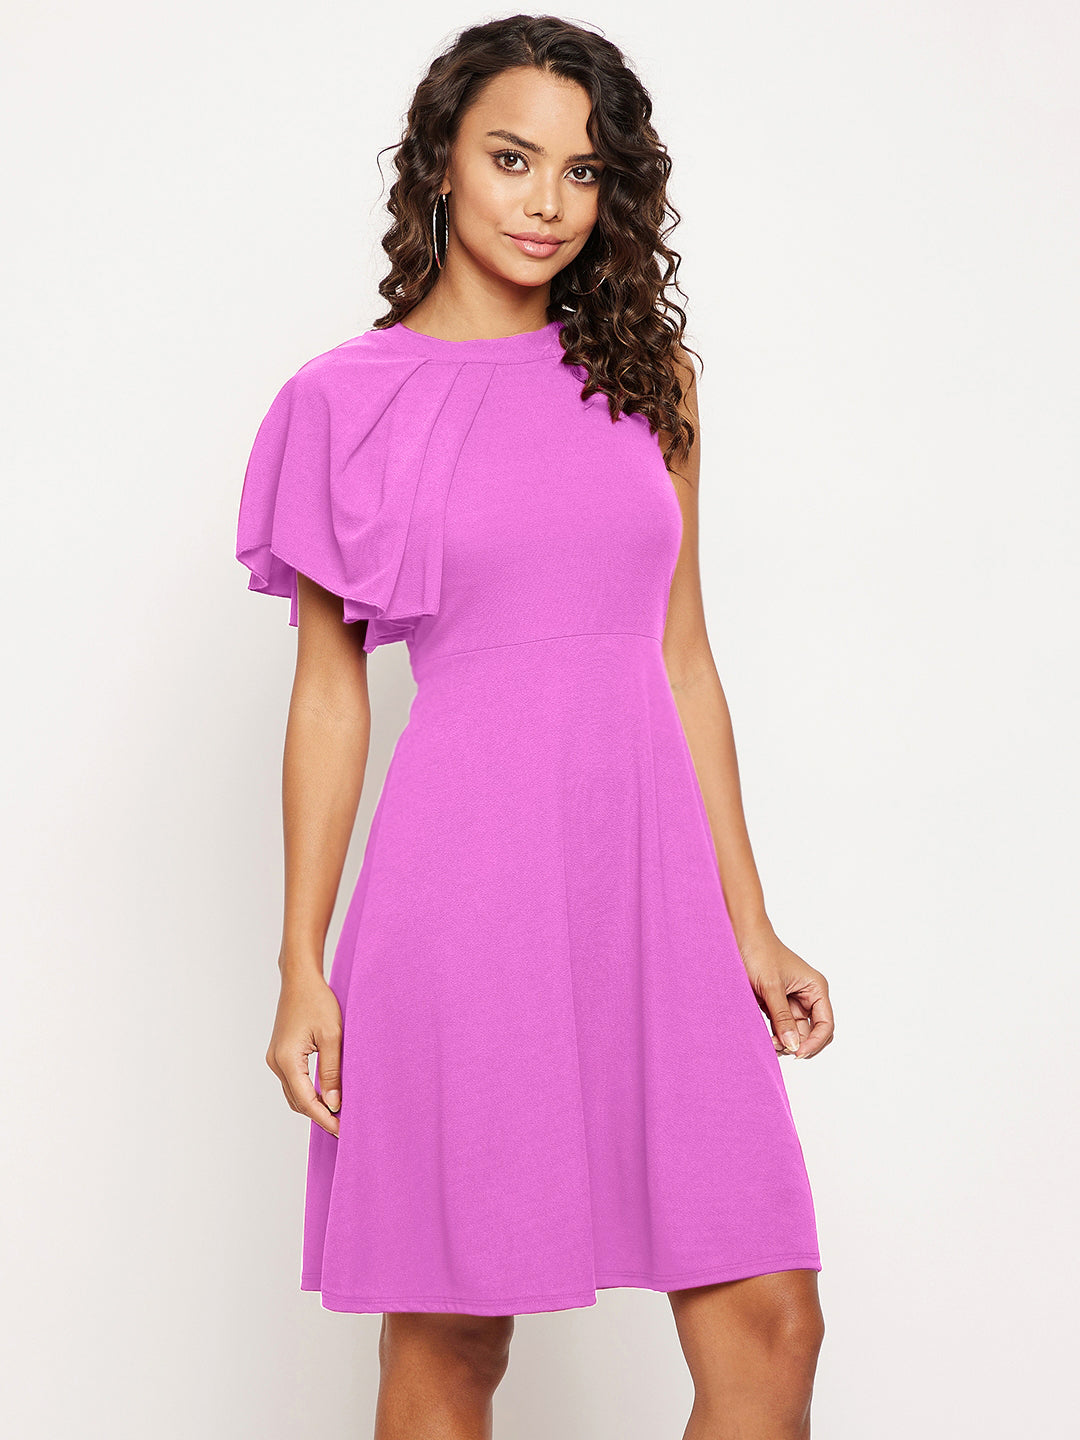 Ruffle Detail Stretchable Cotton Skater Dress - Uptownie